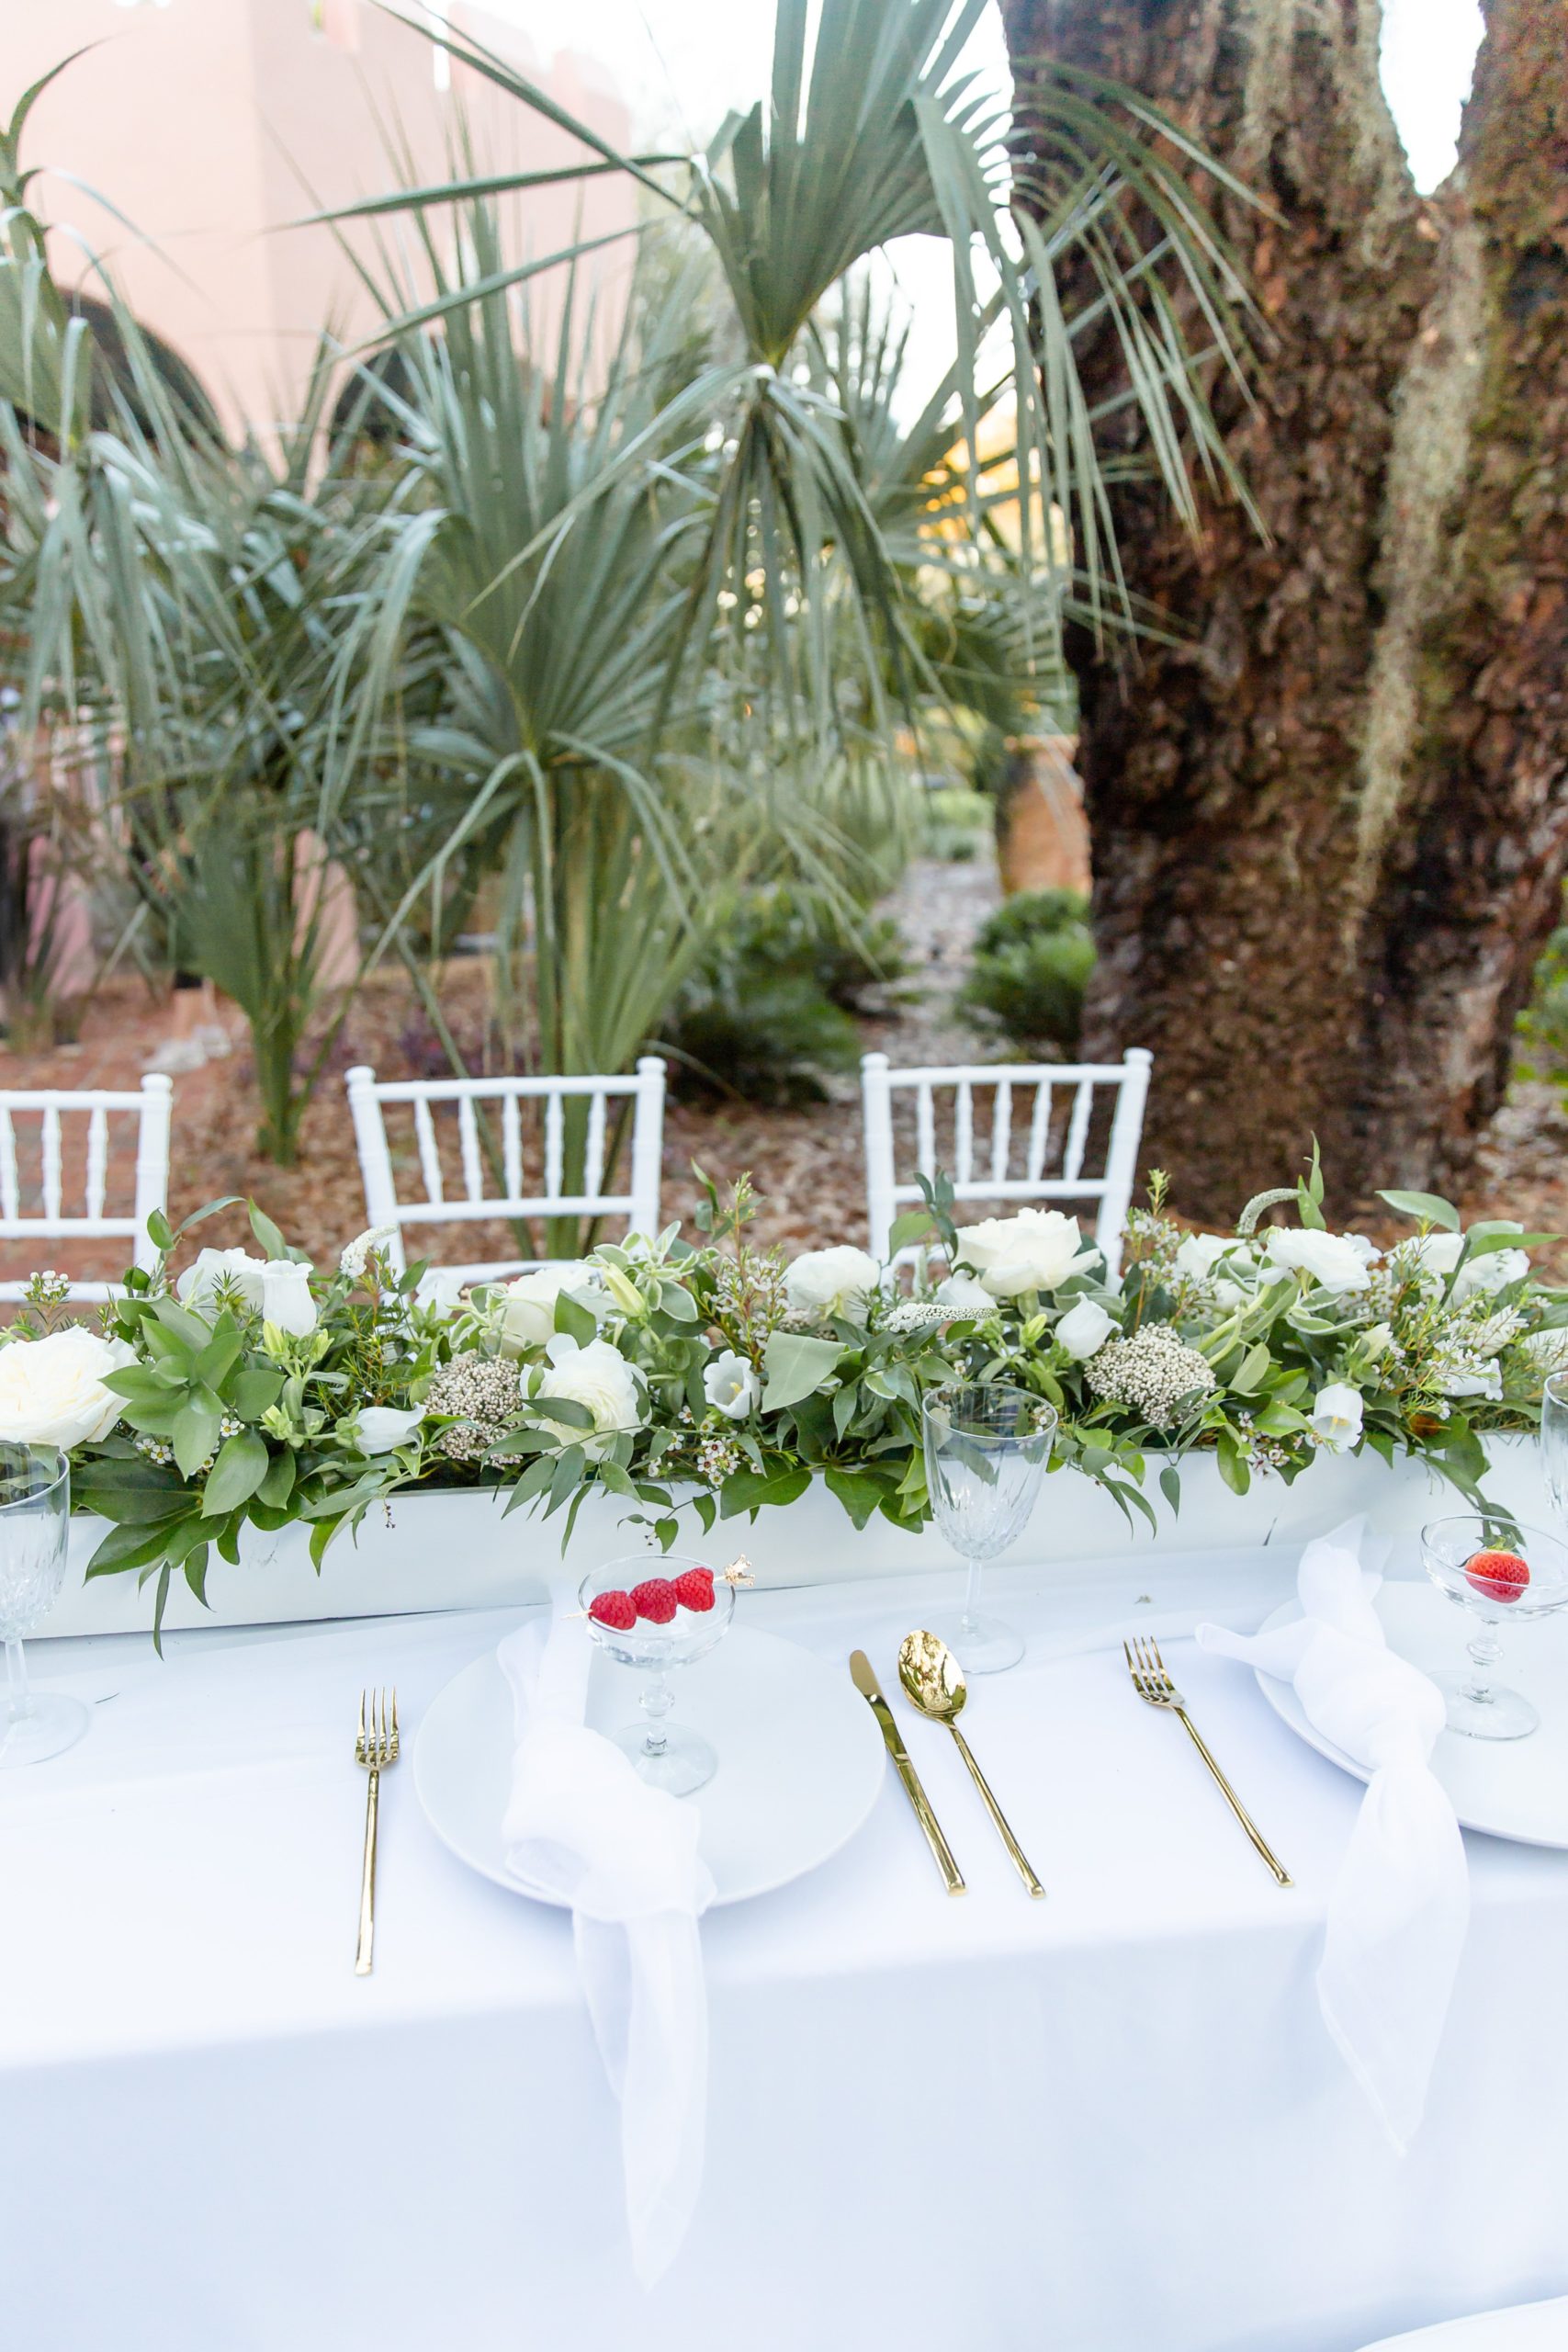 Pillars' Castle family style tablescape under the palm trees